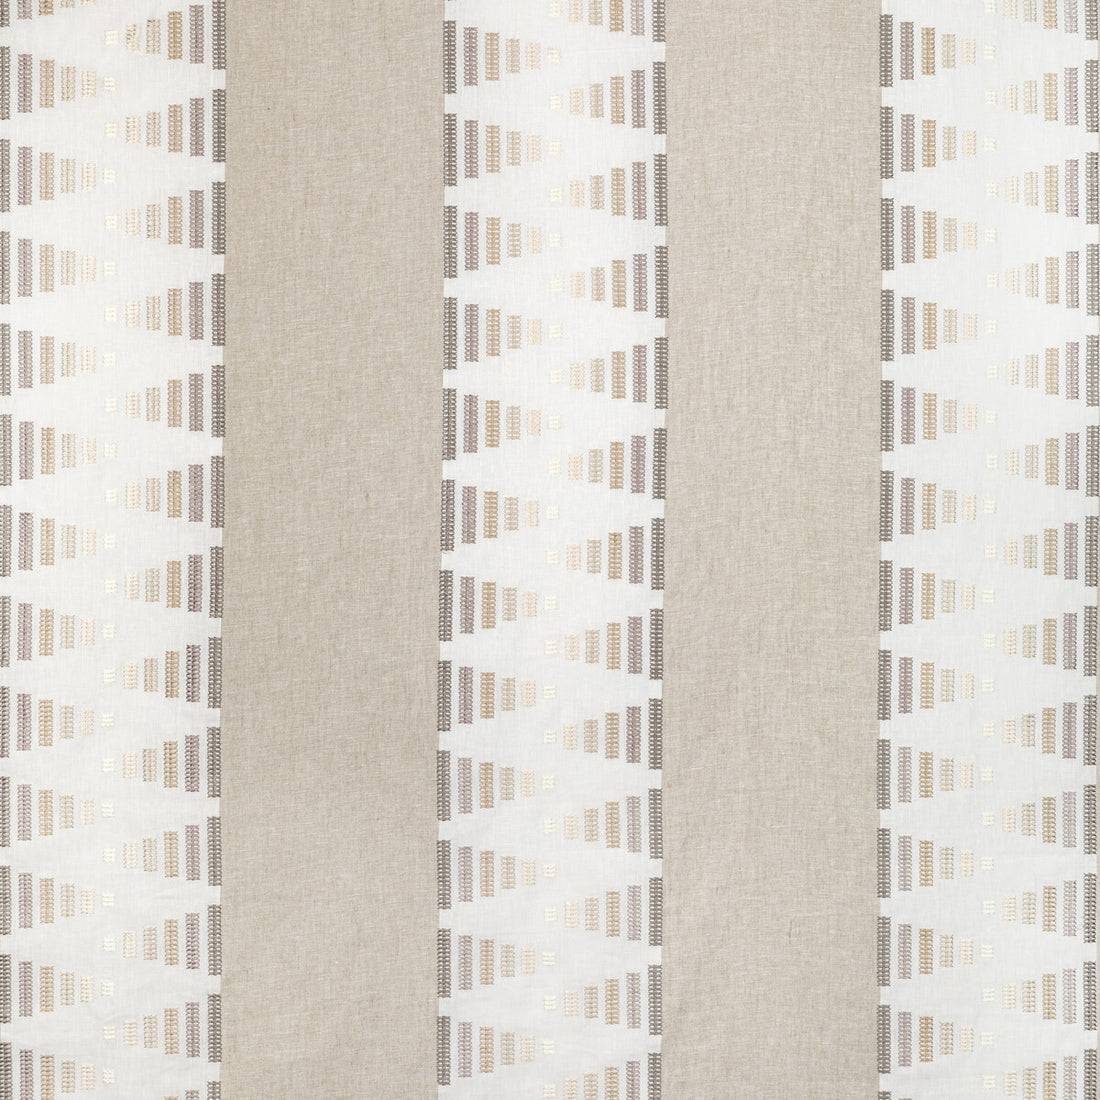 Joined Forces fabric in quartz color - pattern 36353.16.0 - by Kravet Couture in the Modern Luxe III collection